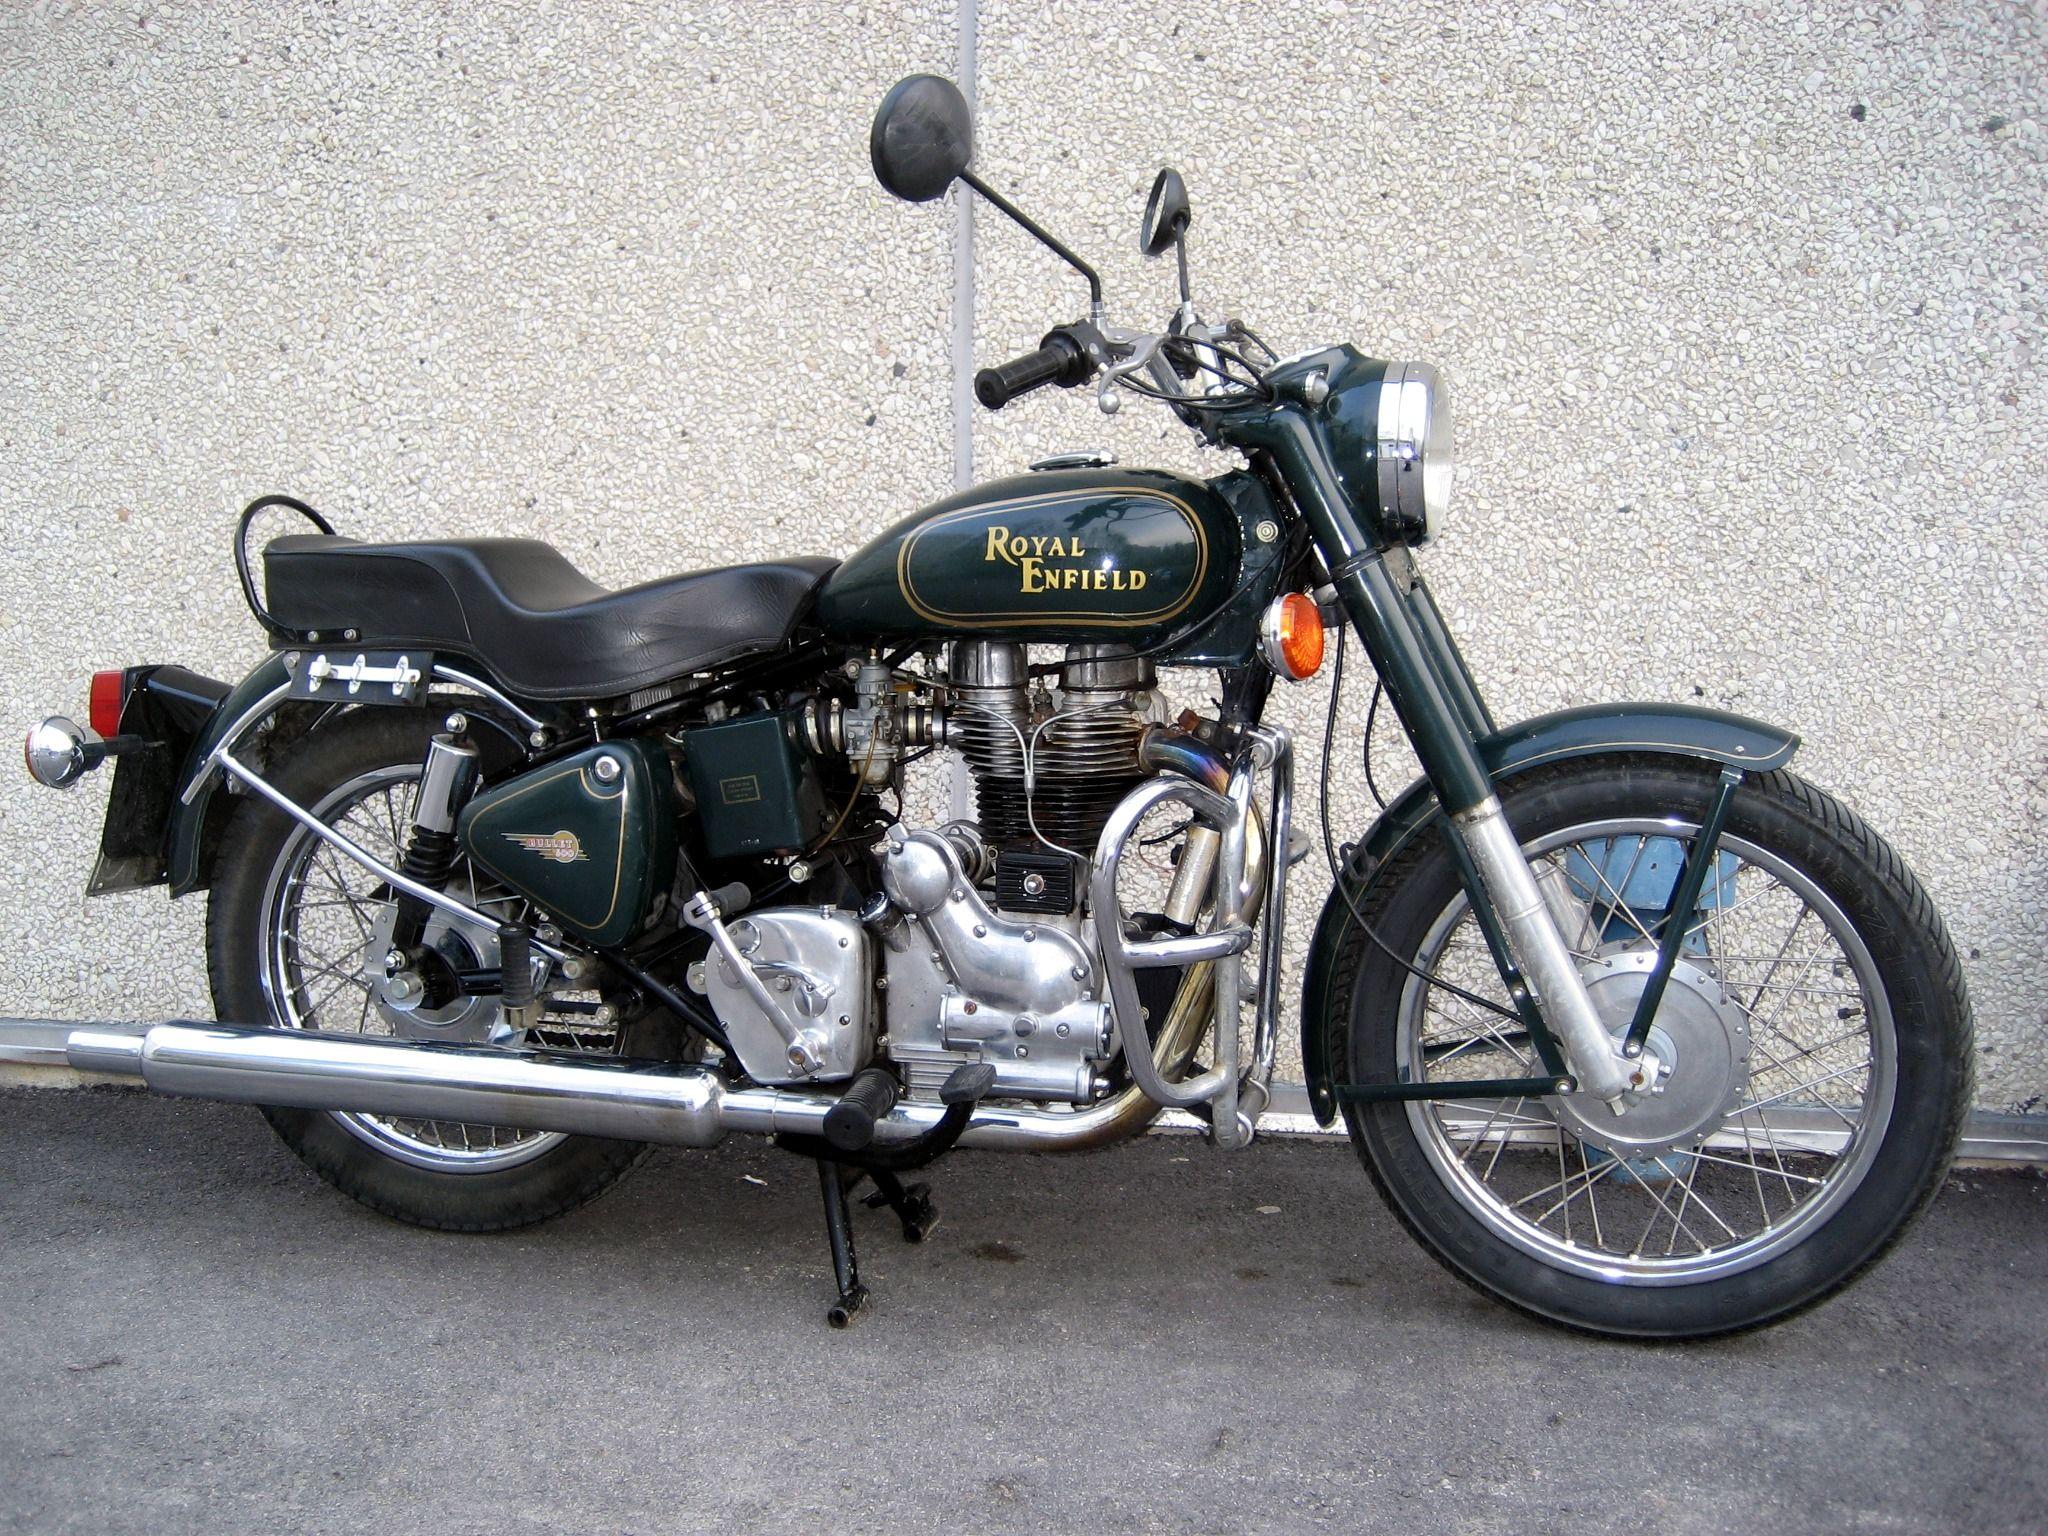 The concept of royal enfield bikes in india began when the indian